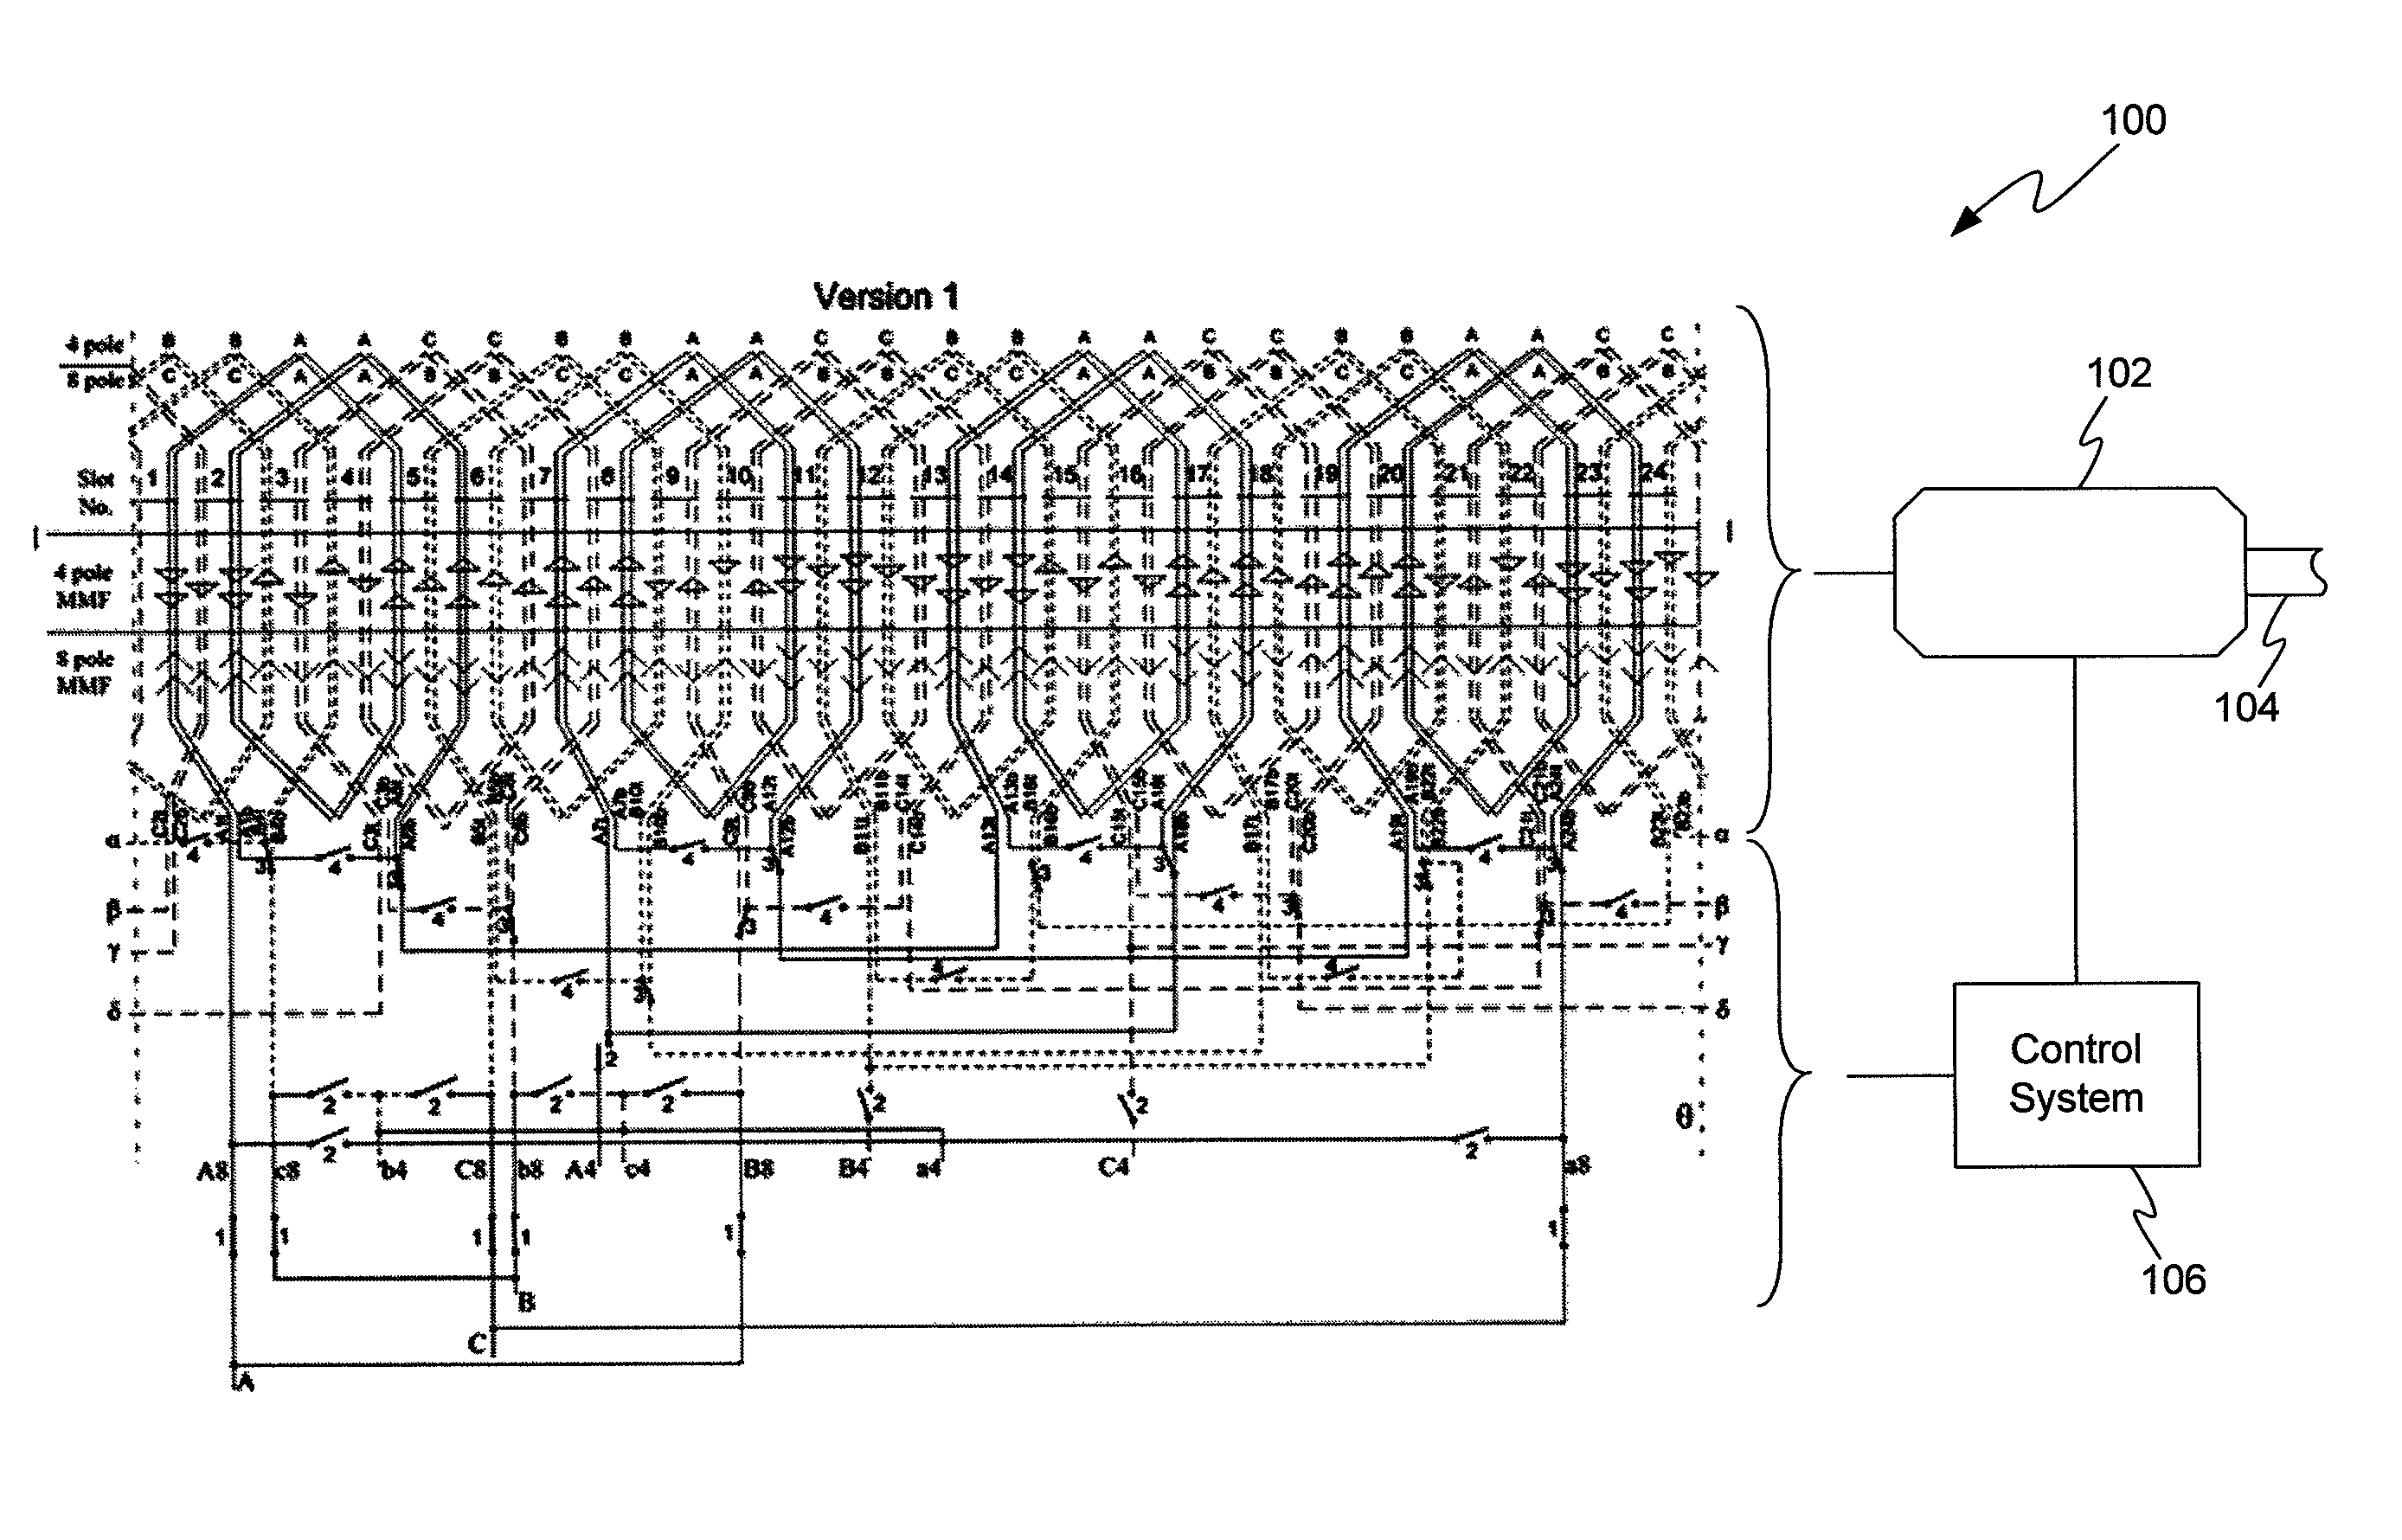 Alternating current machine with increased torque above and below rated speed for hybrid electric propulsion systems